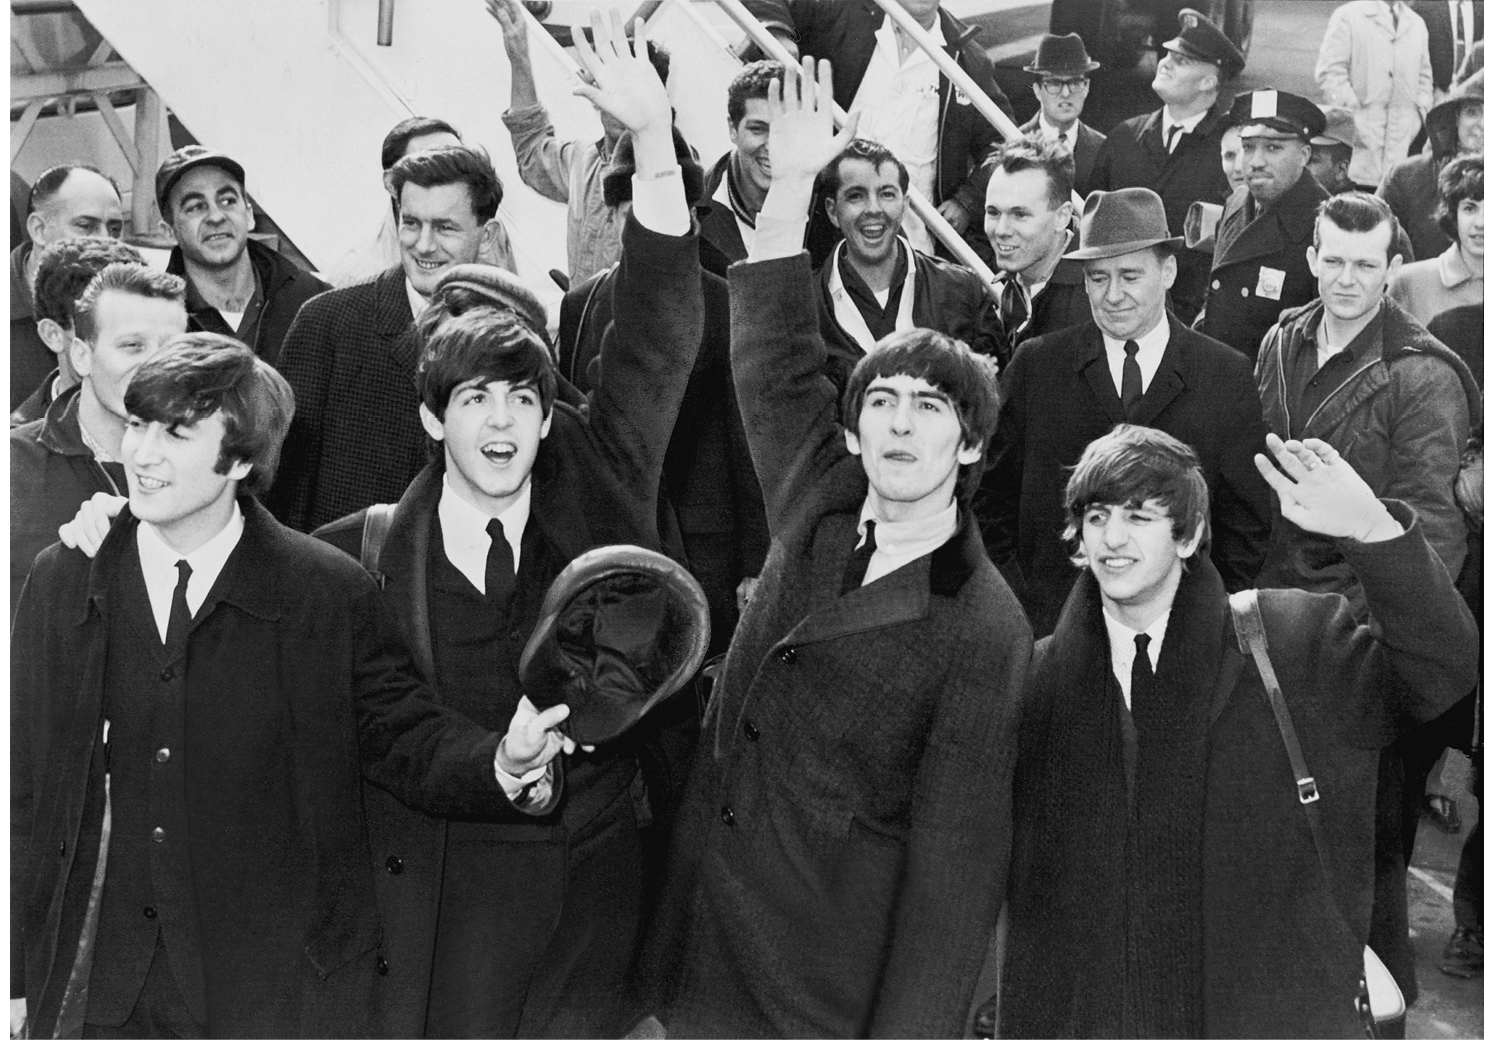 A black and white photograph from 1964 of The Beatles after arriving at Kennedy Airport shows the four music group members waving to their fans; behind them, other flight passengers walk from the airstair.